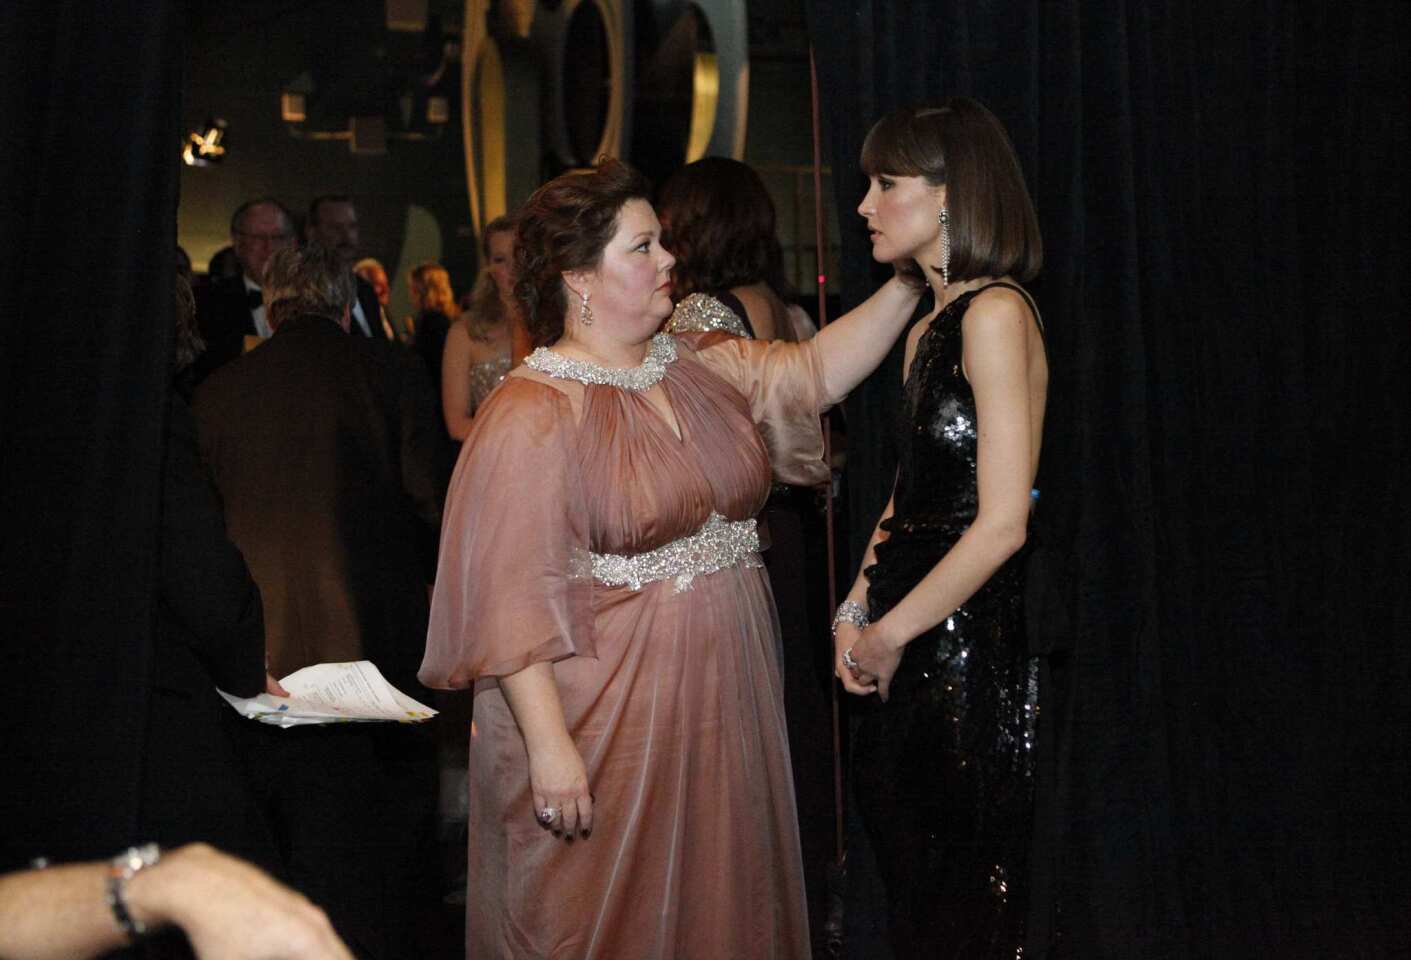 McCarthy, left, nominated for role in "Bridesmaids," reconnects with Bryne, who also had a role in the film. No doubt the two shared plenty of back-stage time together this award season.